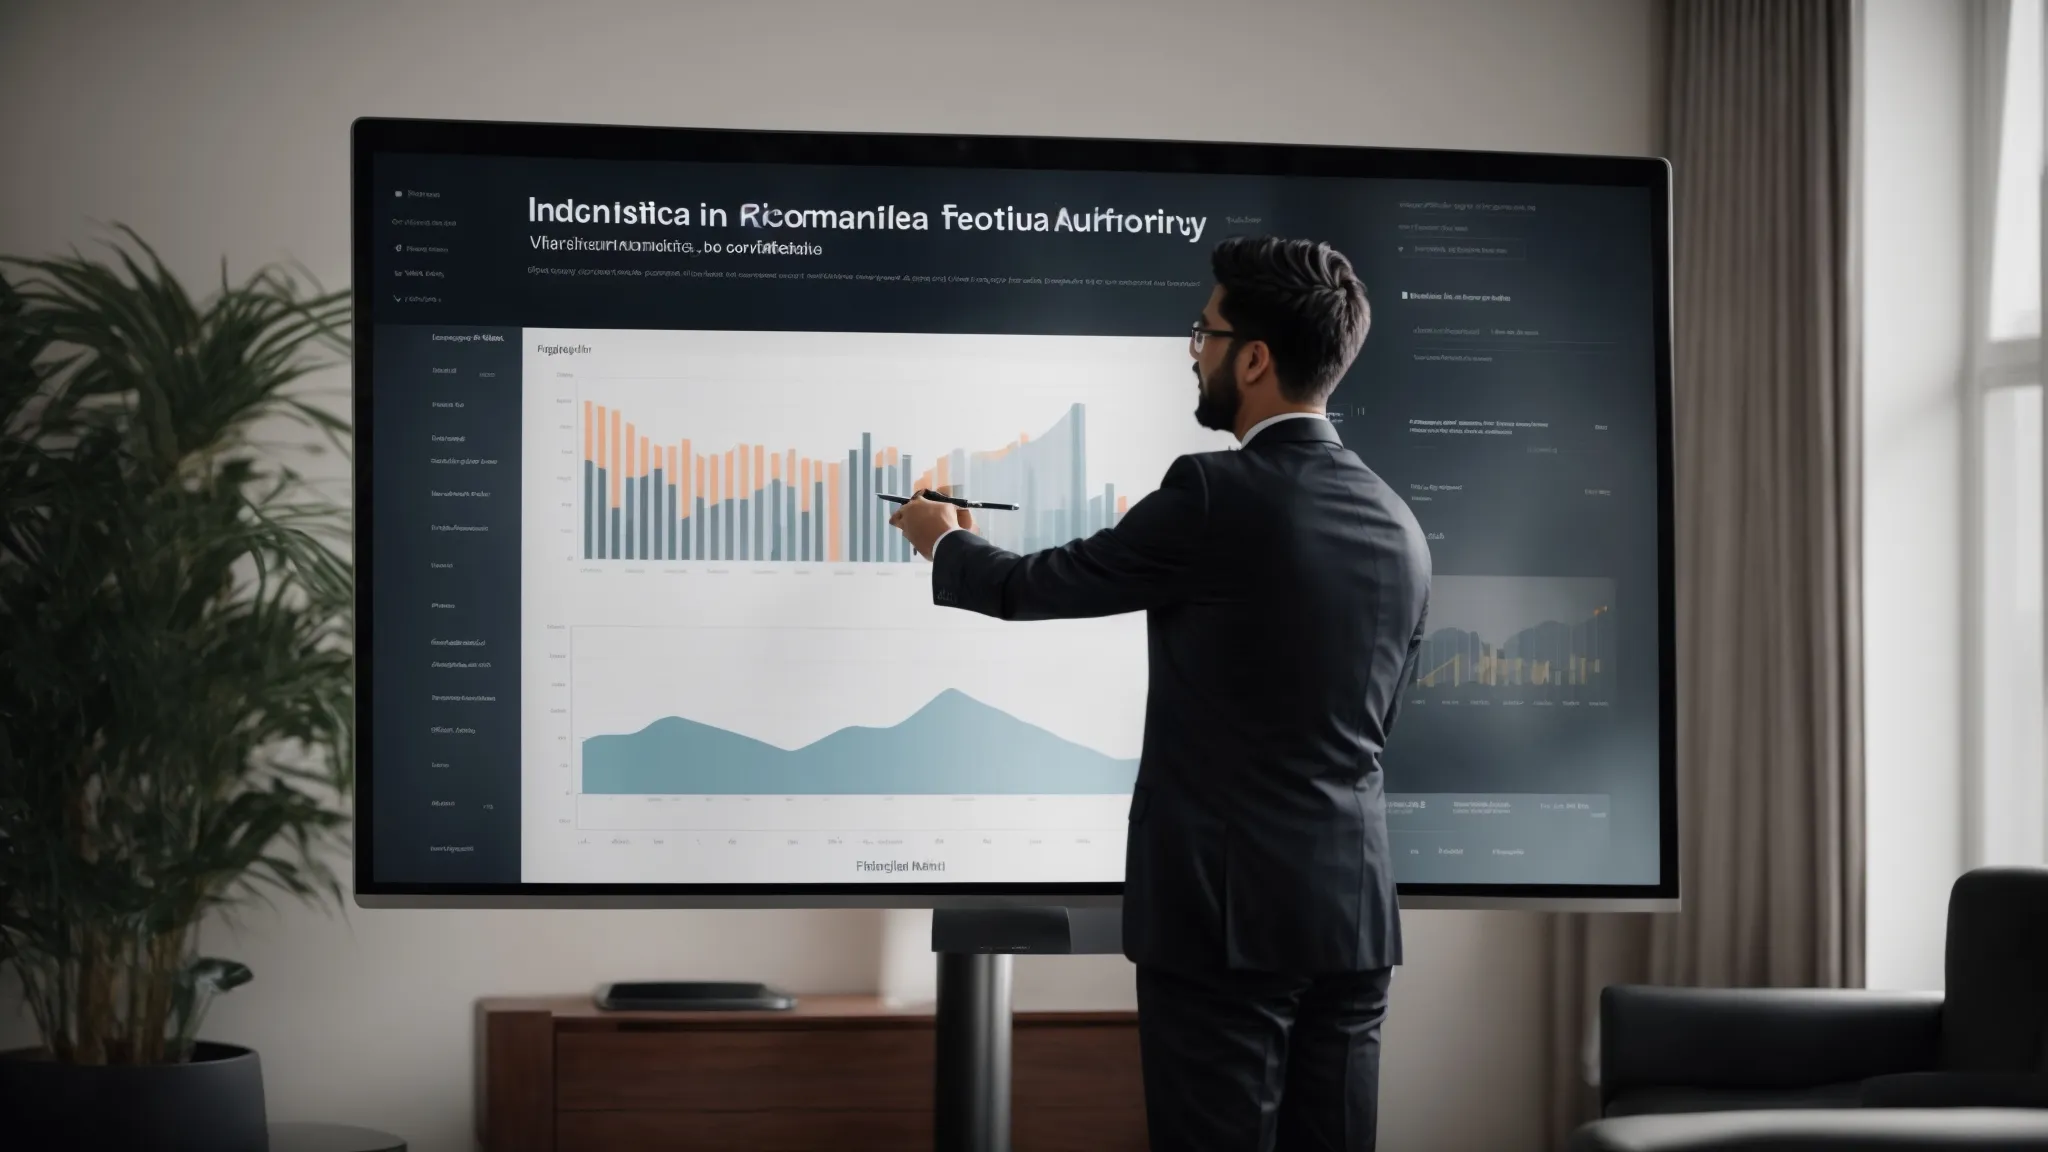 a digital marketing strategist presents a growth chart on a screen indicating rising domain authority.